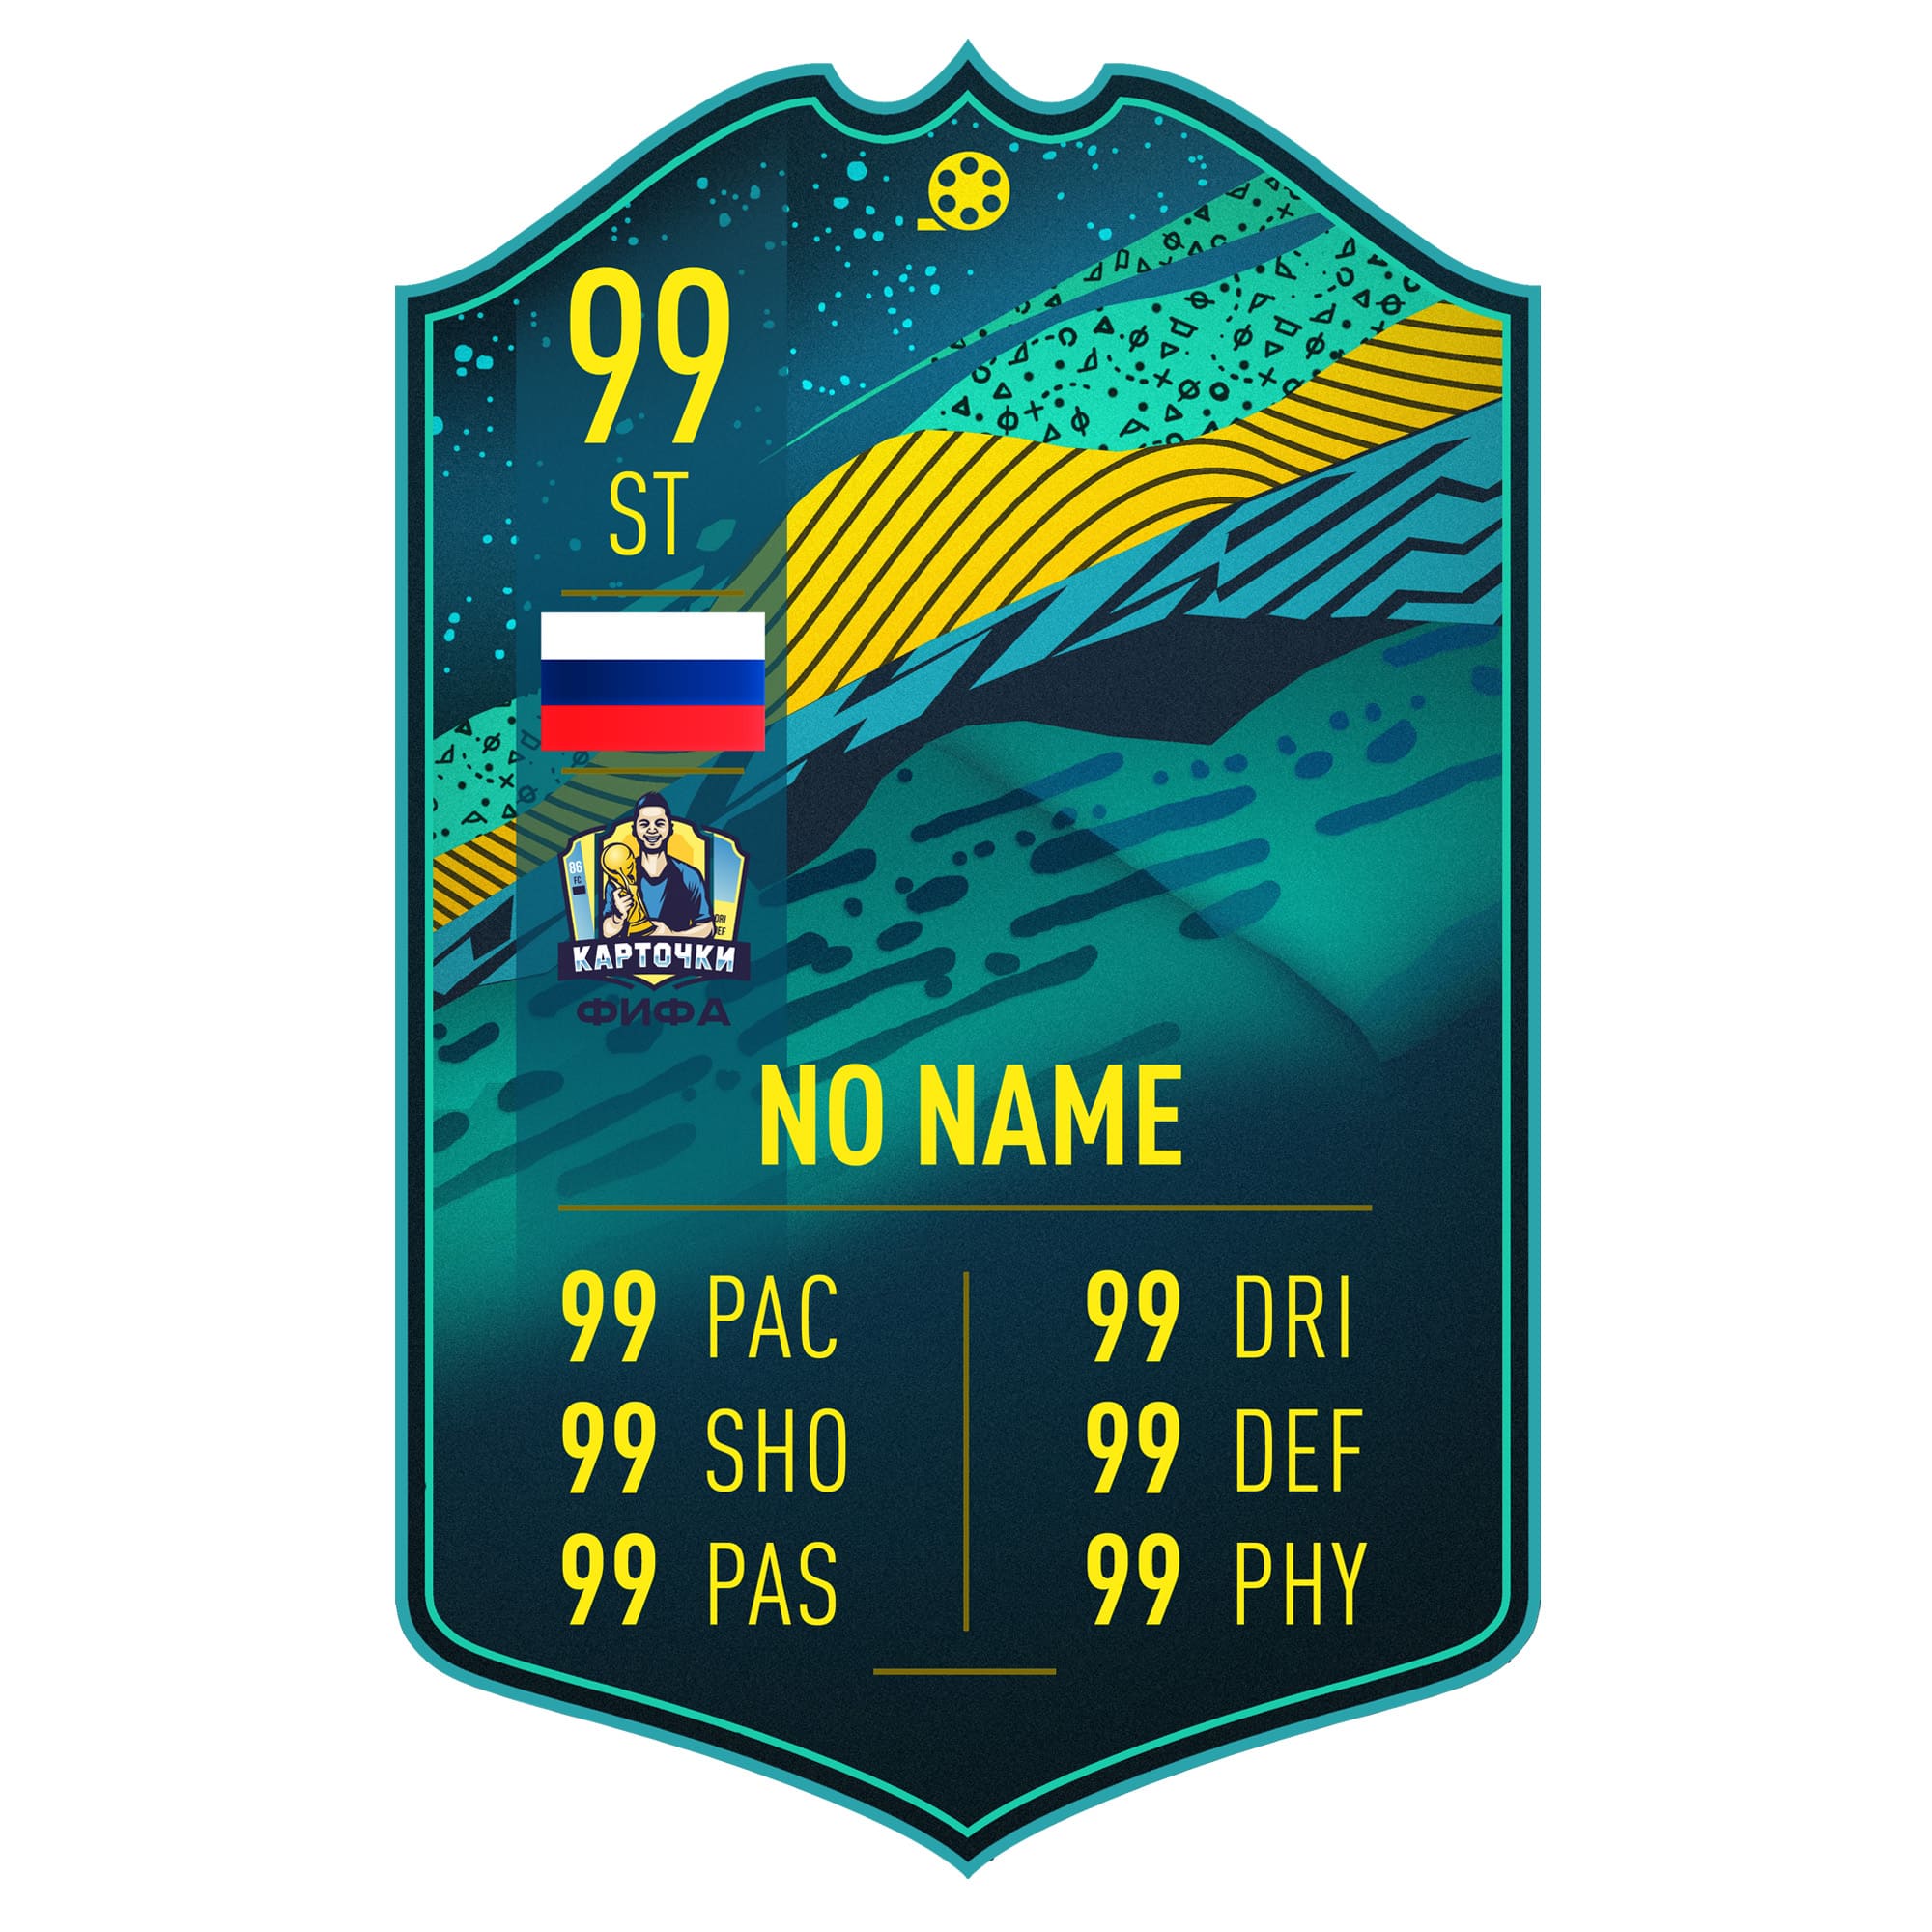 player moments card fifa 20